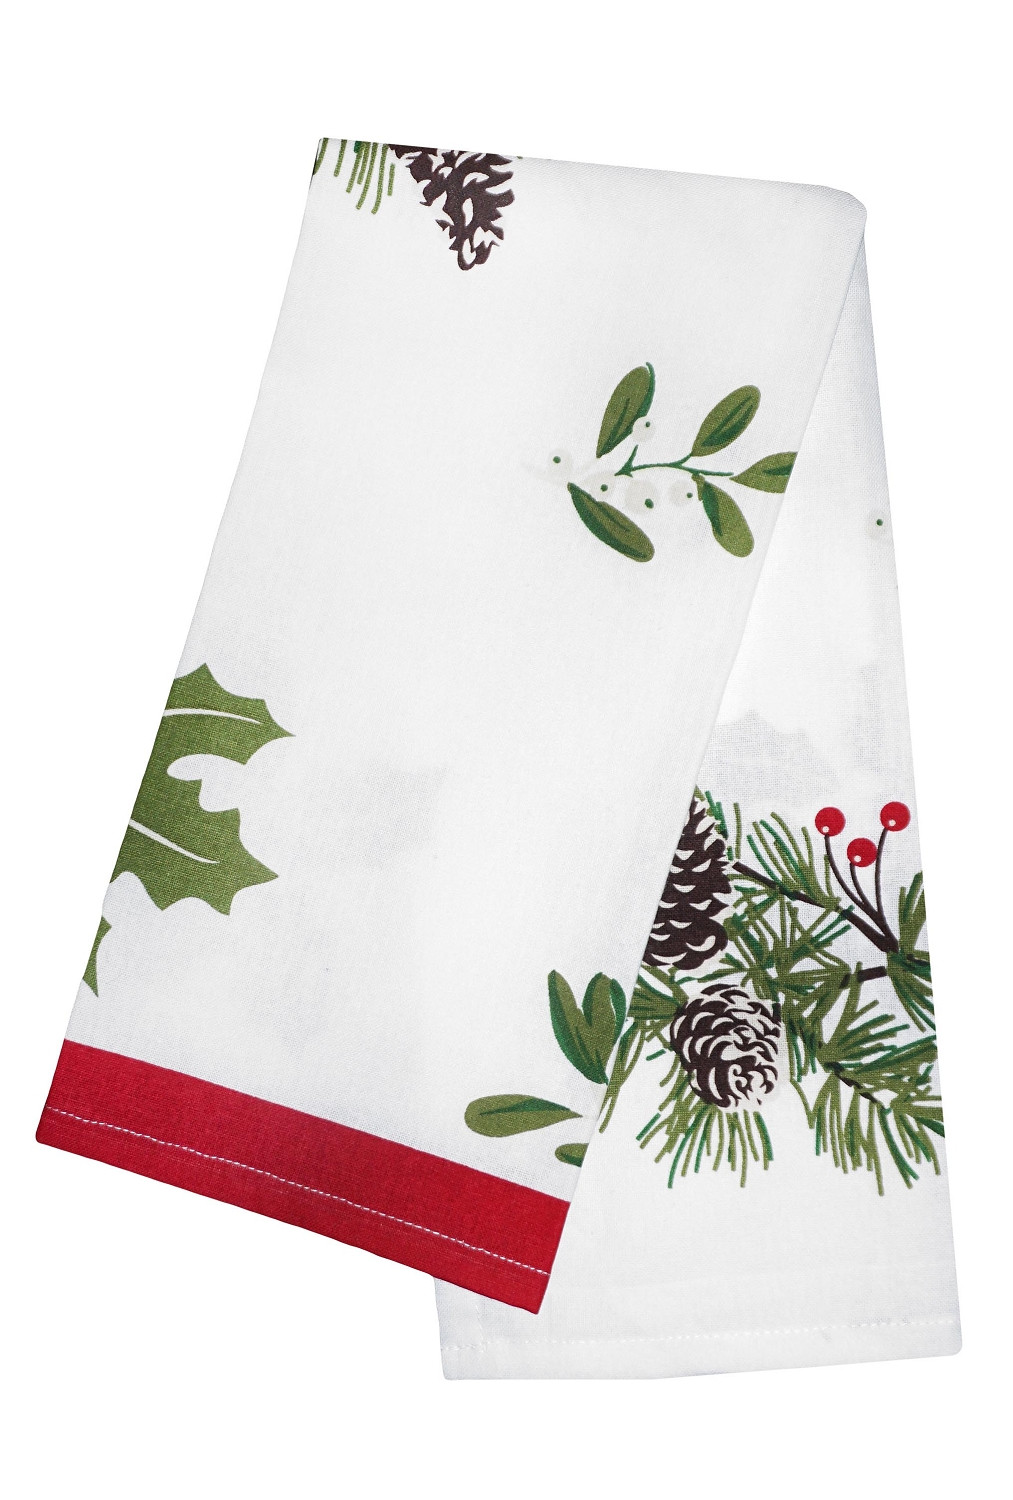 Christmas Kitchen Towels
 Christmas Pine Cones Kitchen Towels